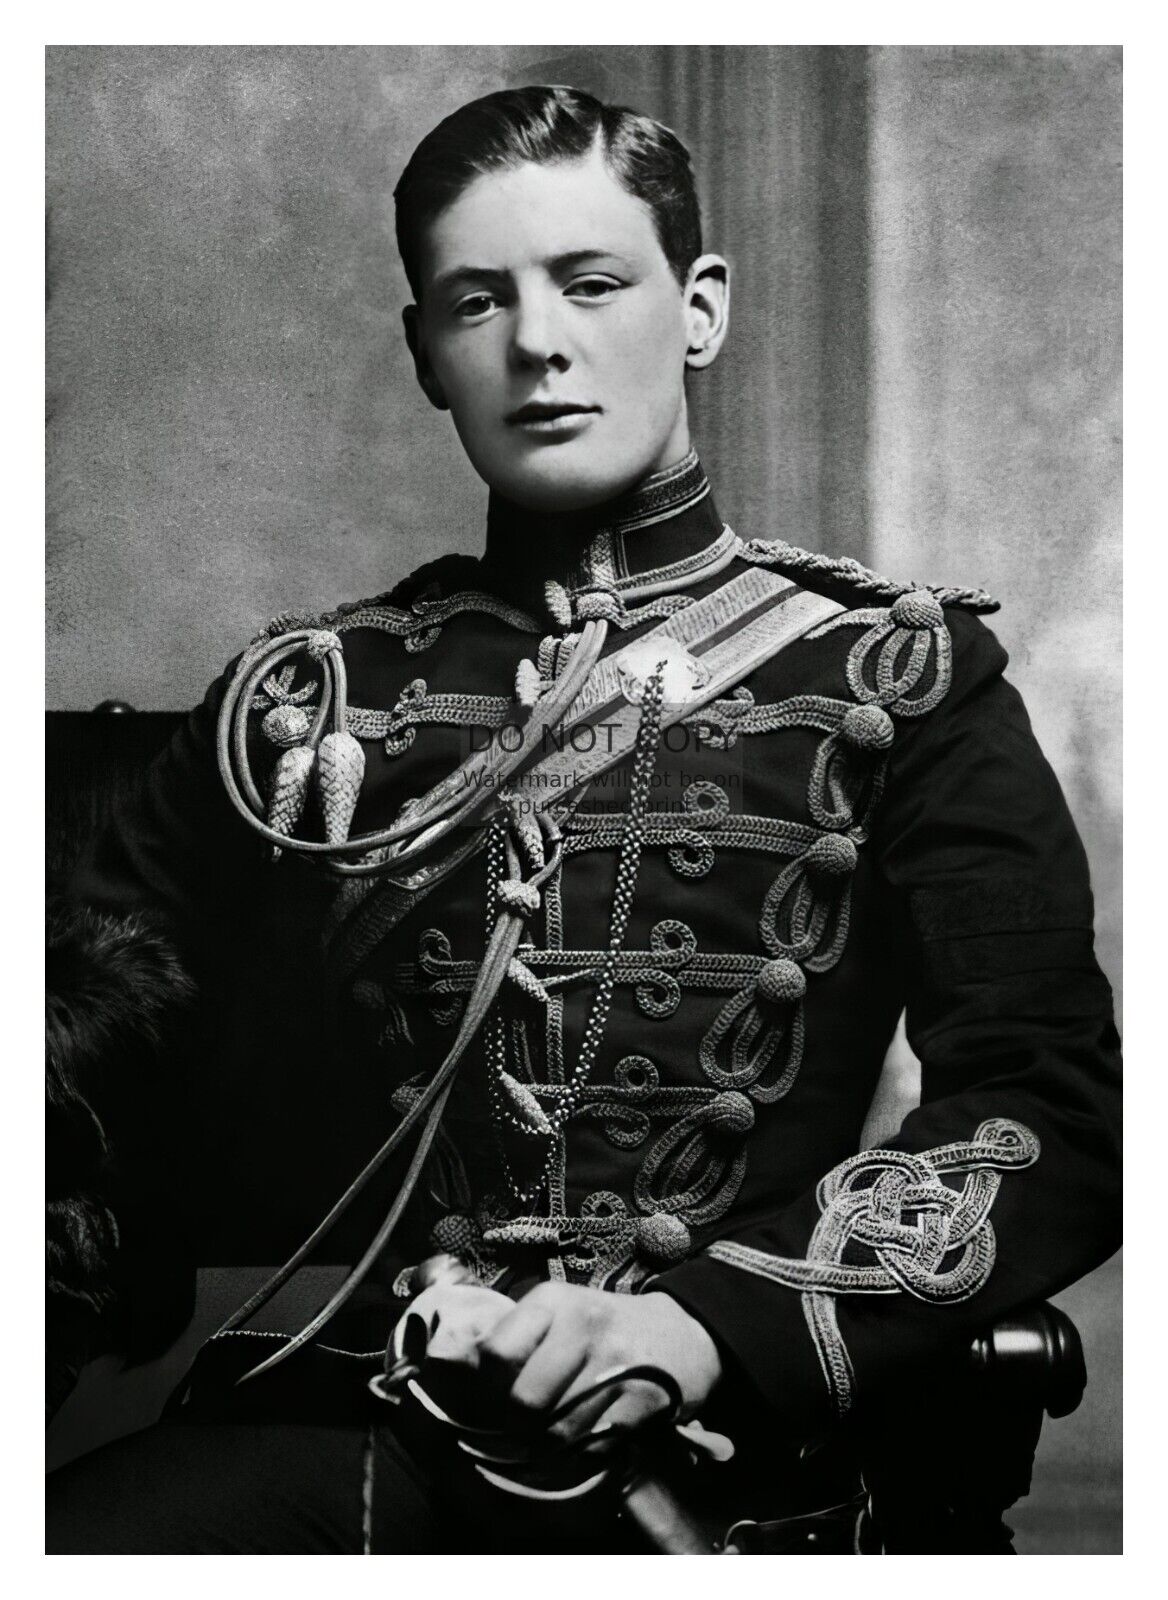 YOUNG WINSTON CHURCHILL IN MILITARY UNIFORM 1895 UK WORLD LEADER 5X7 PHOTO